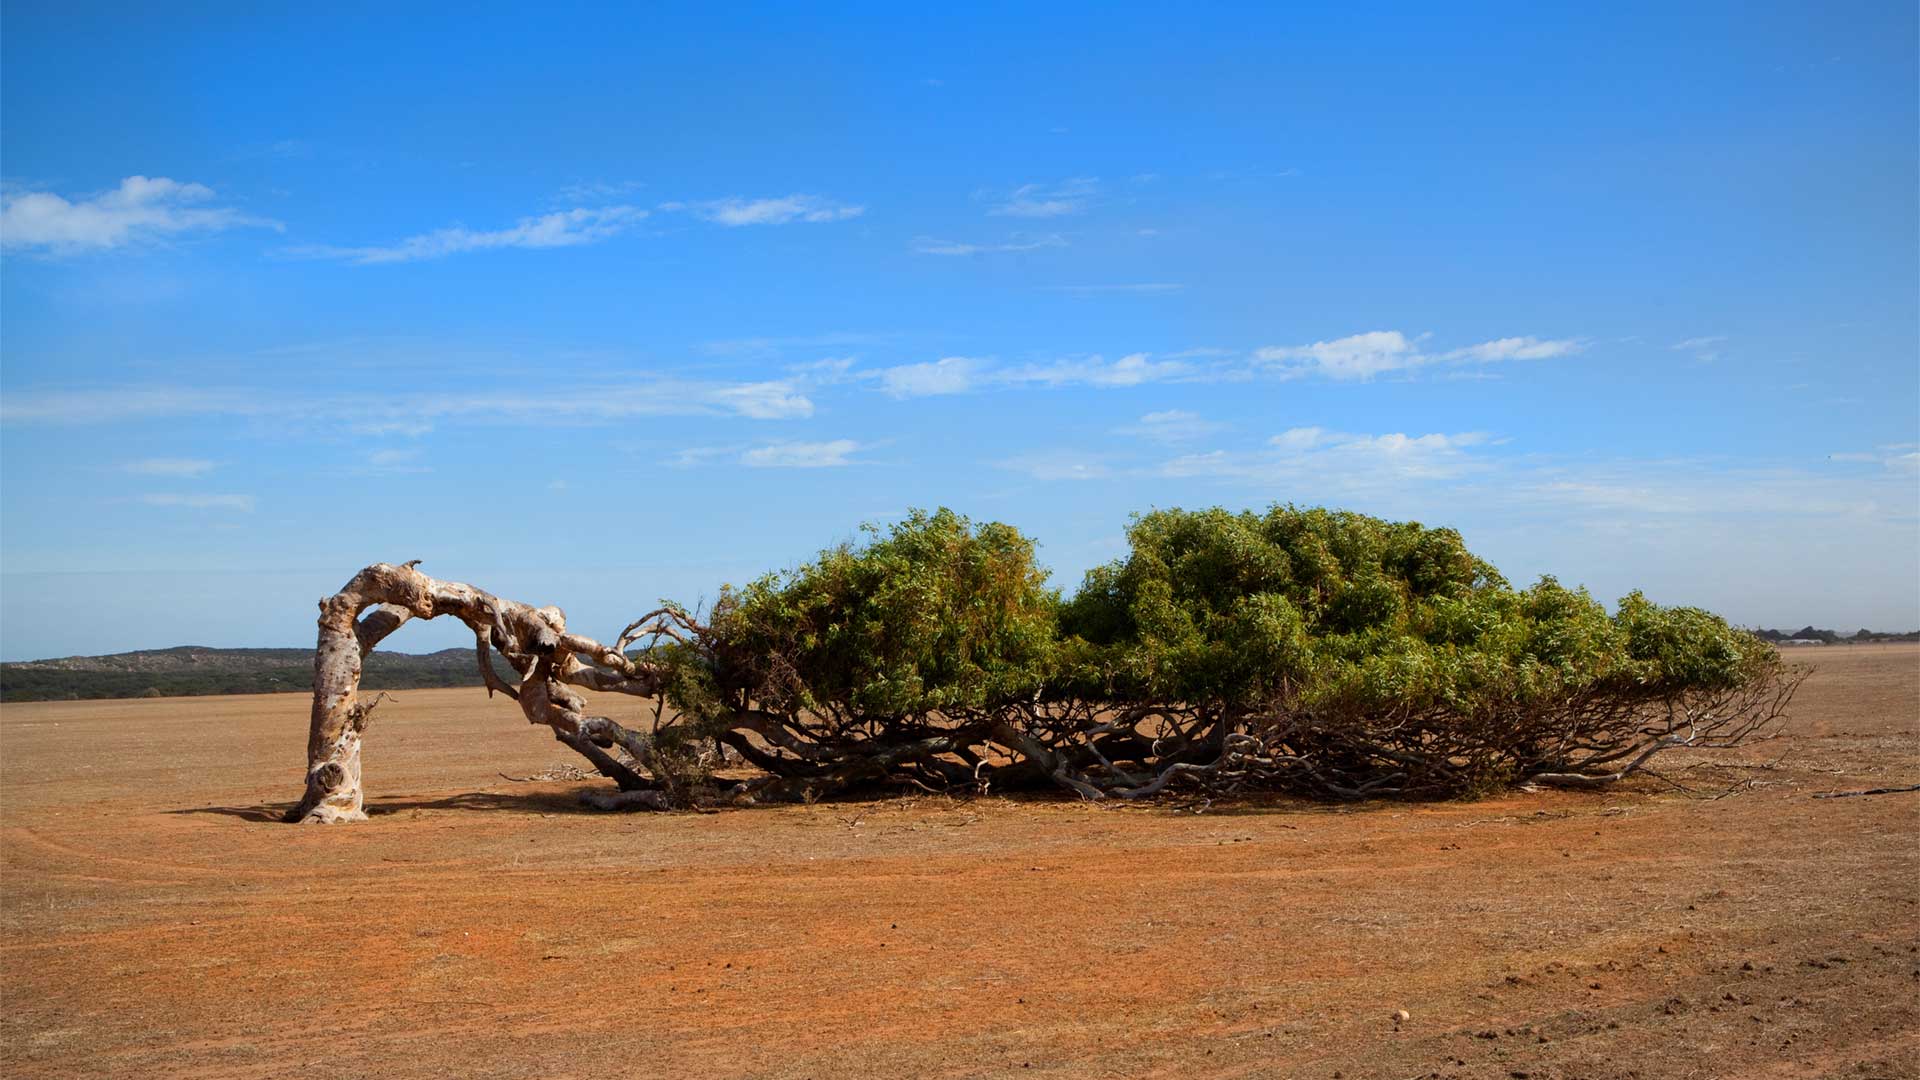 A leaning tree bent over in a desert